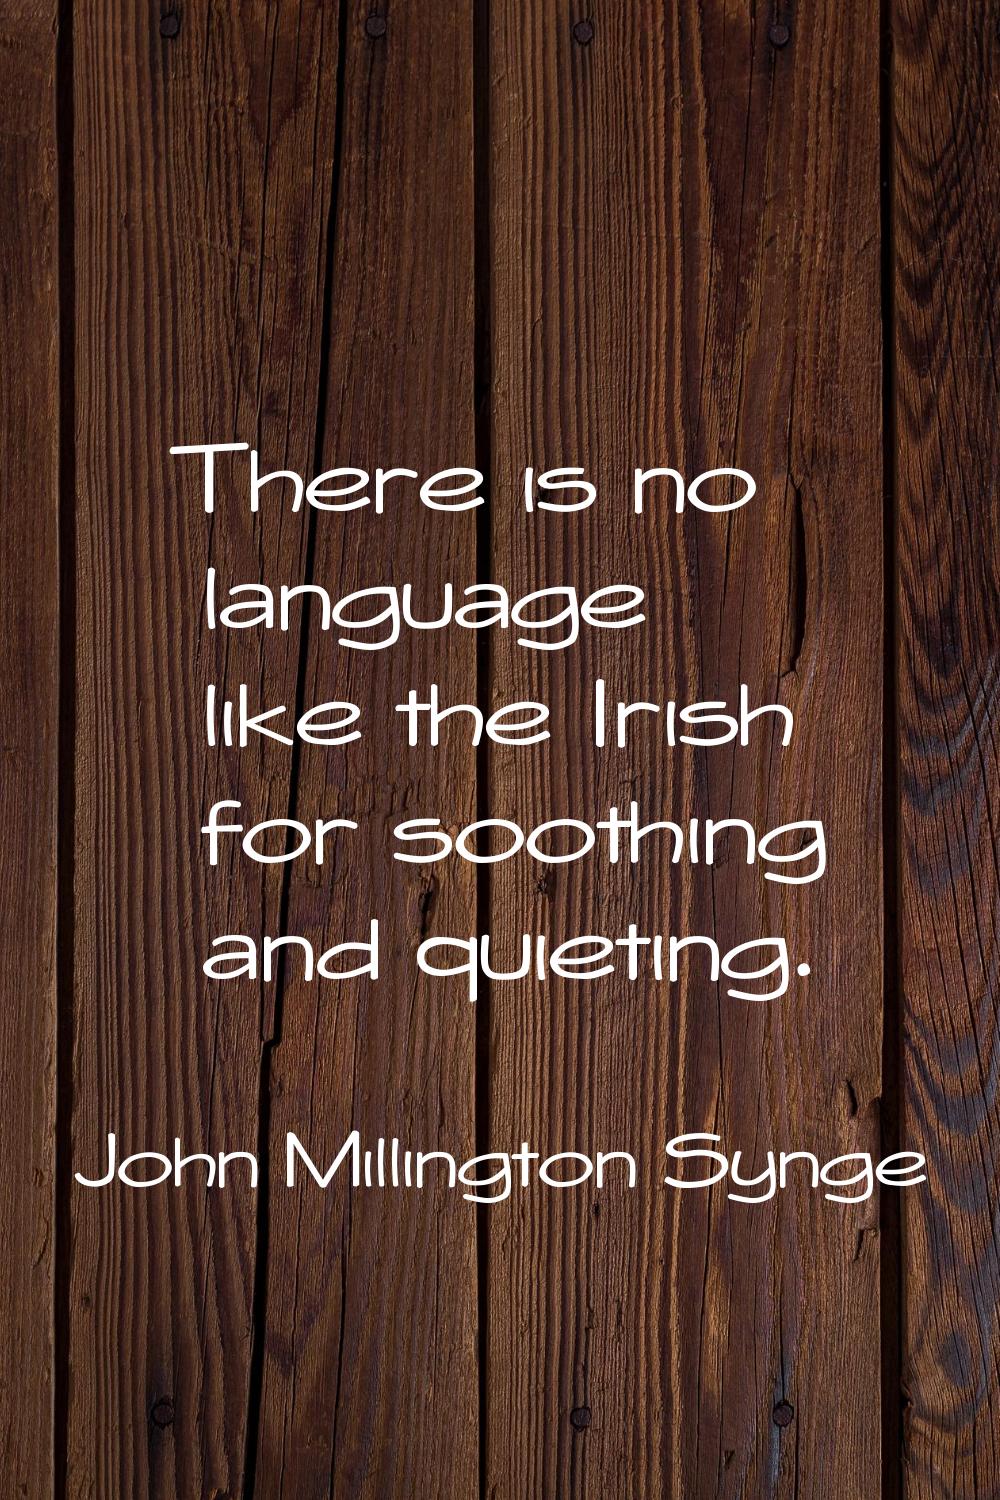 There is no language like the Irish for soothing and quieting.